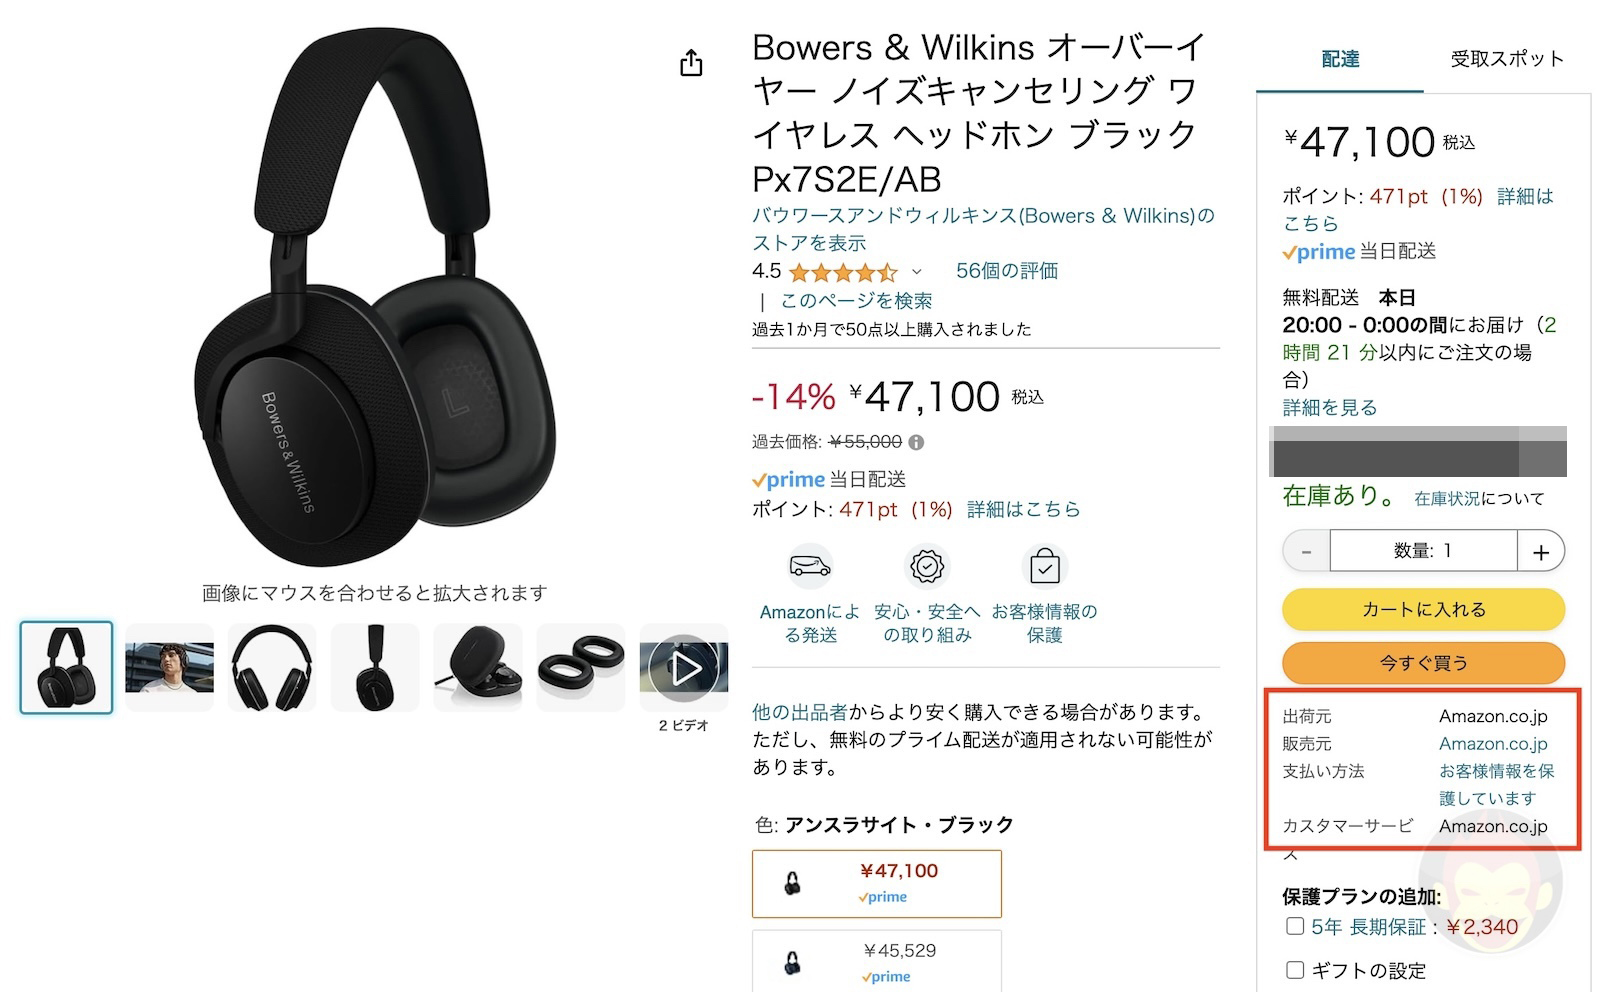 Official-Amazon-product-01.jpg